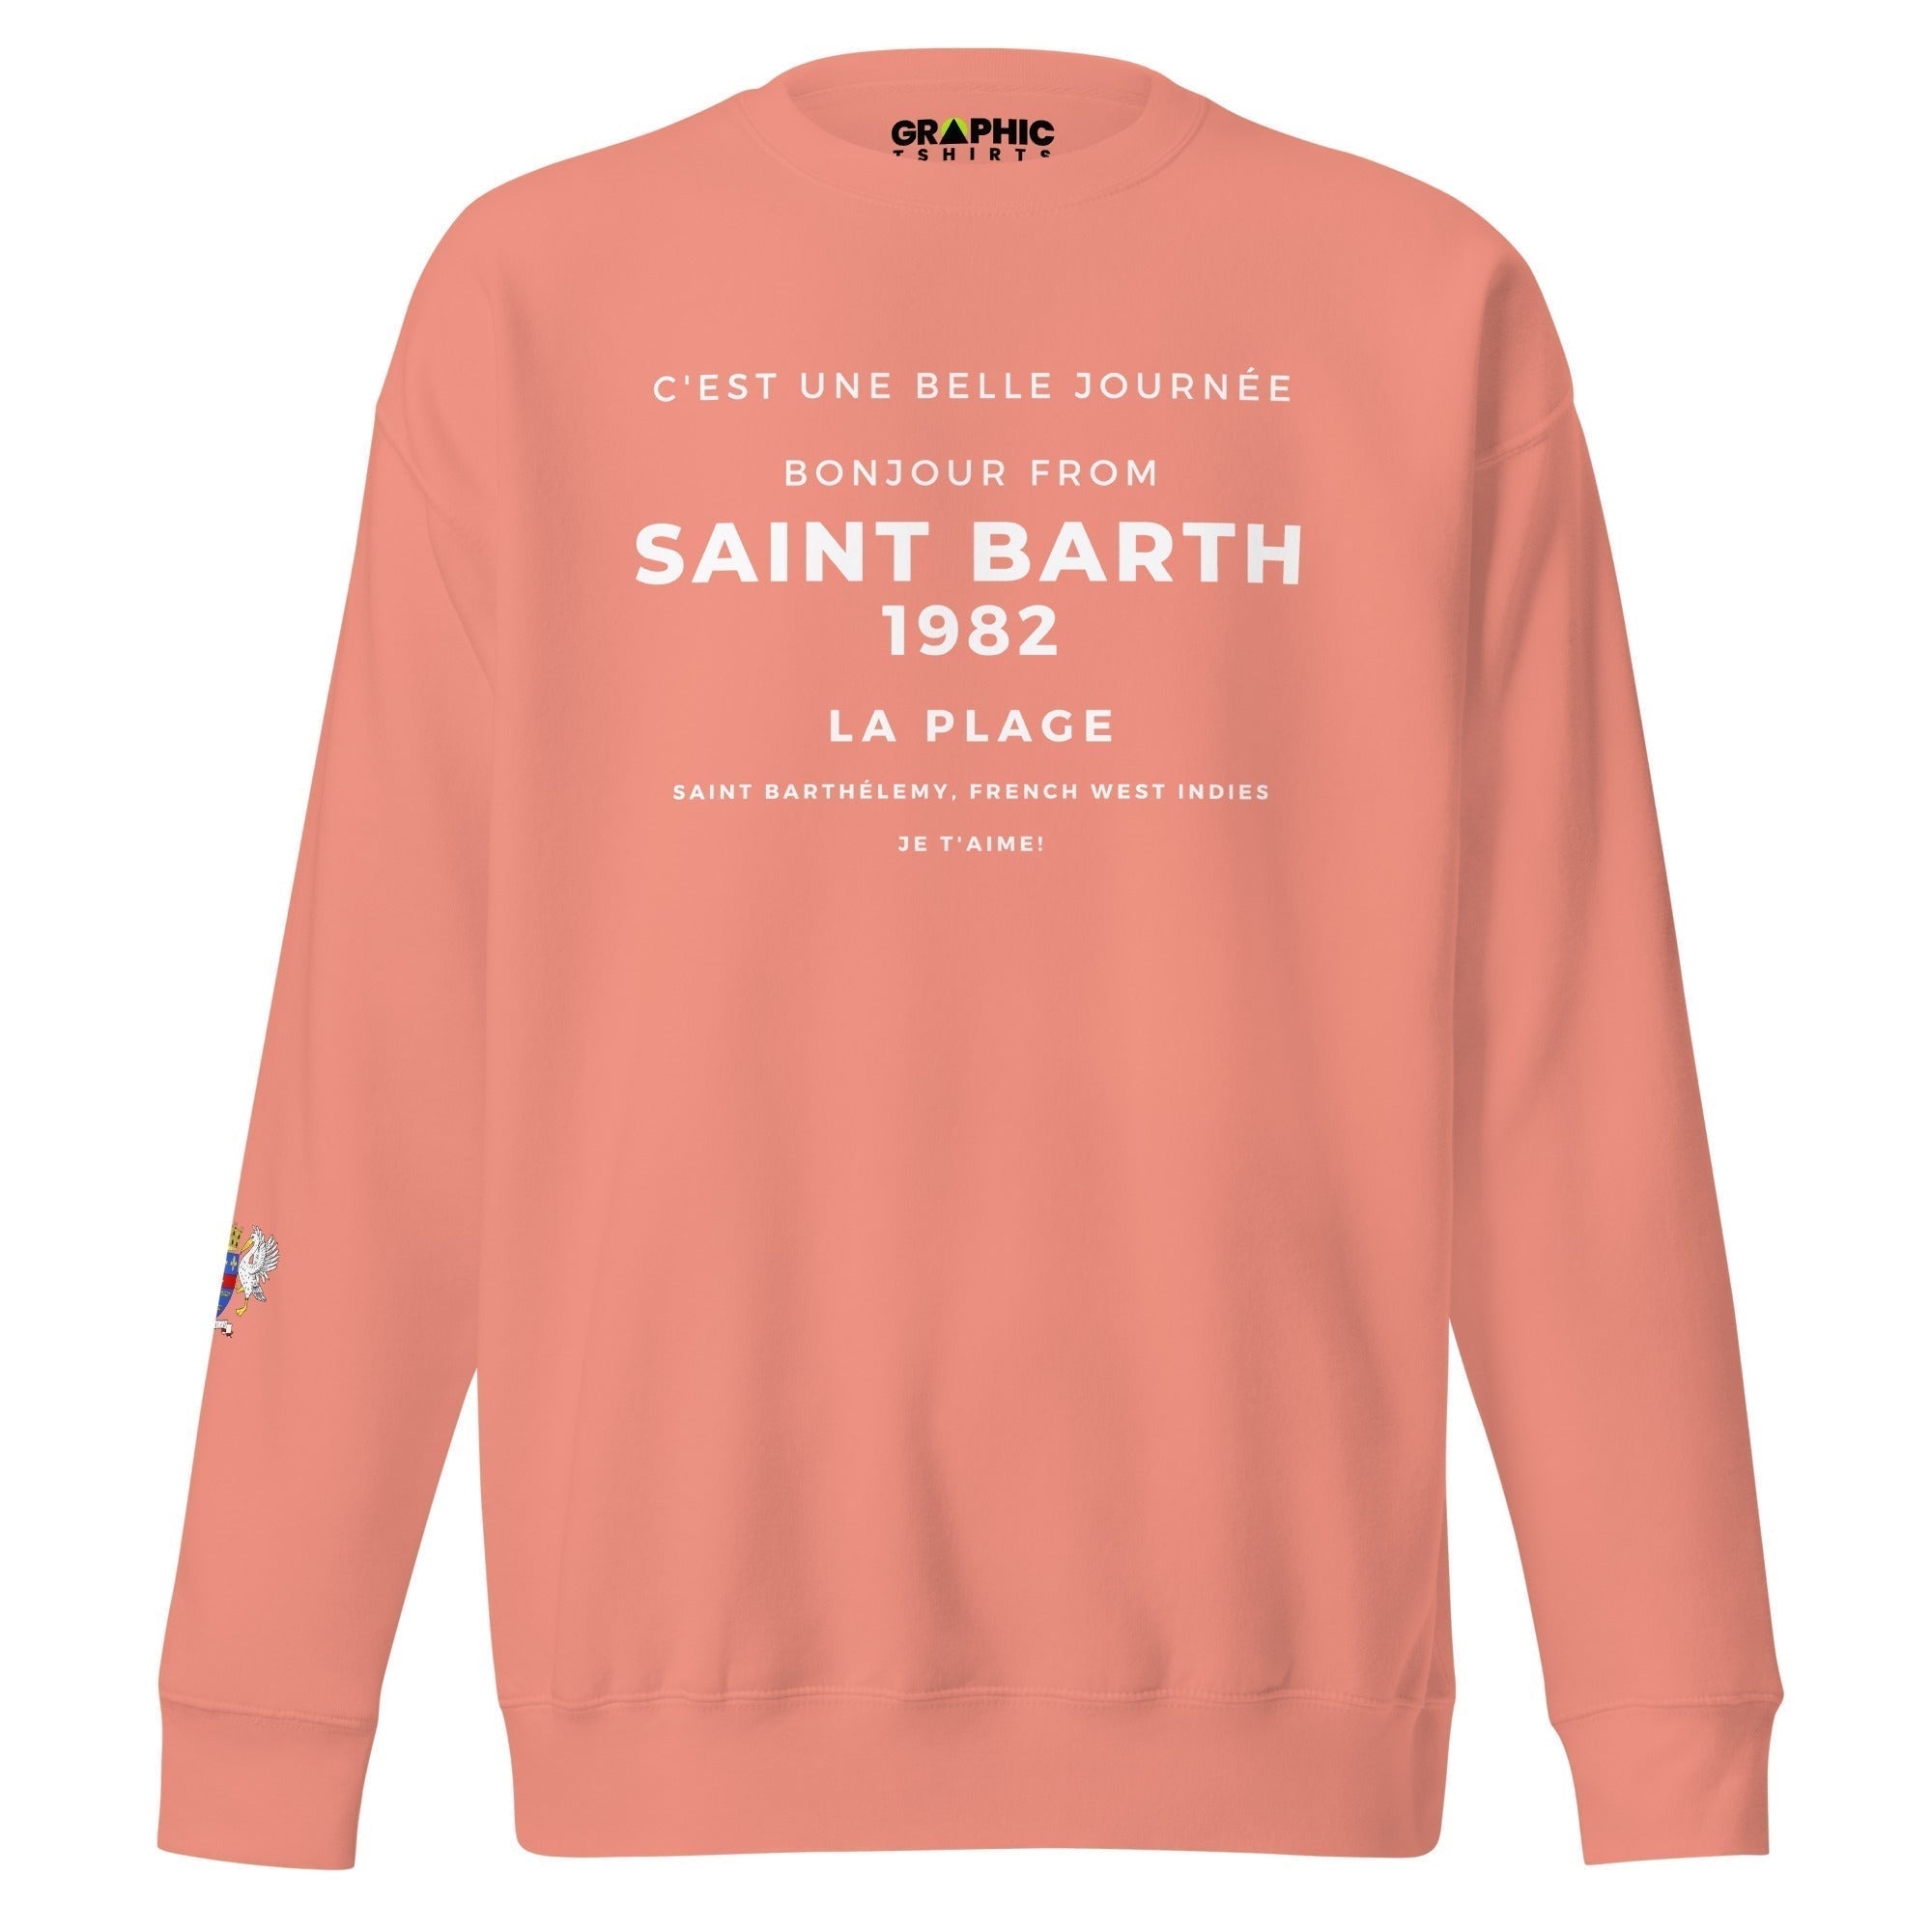 Unisex Premium Sweatshirt - Bonjour From Saint Barthelemy French West Indies 1982 Je T'Aime! - GRAPHIC T-SHIRTS